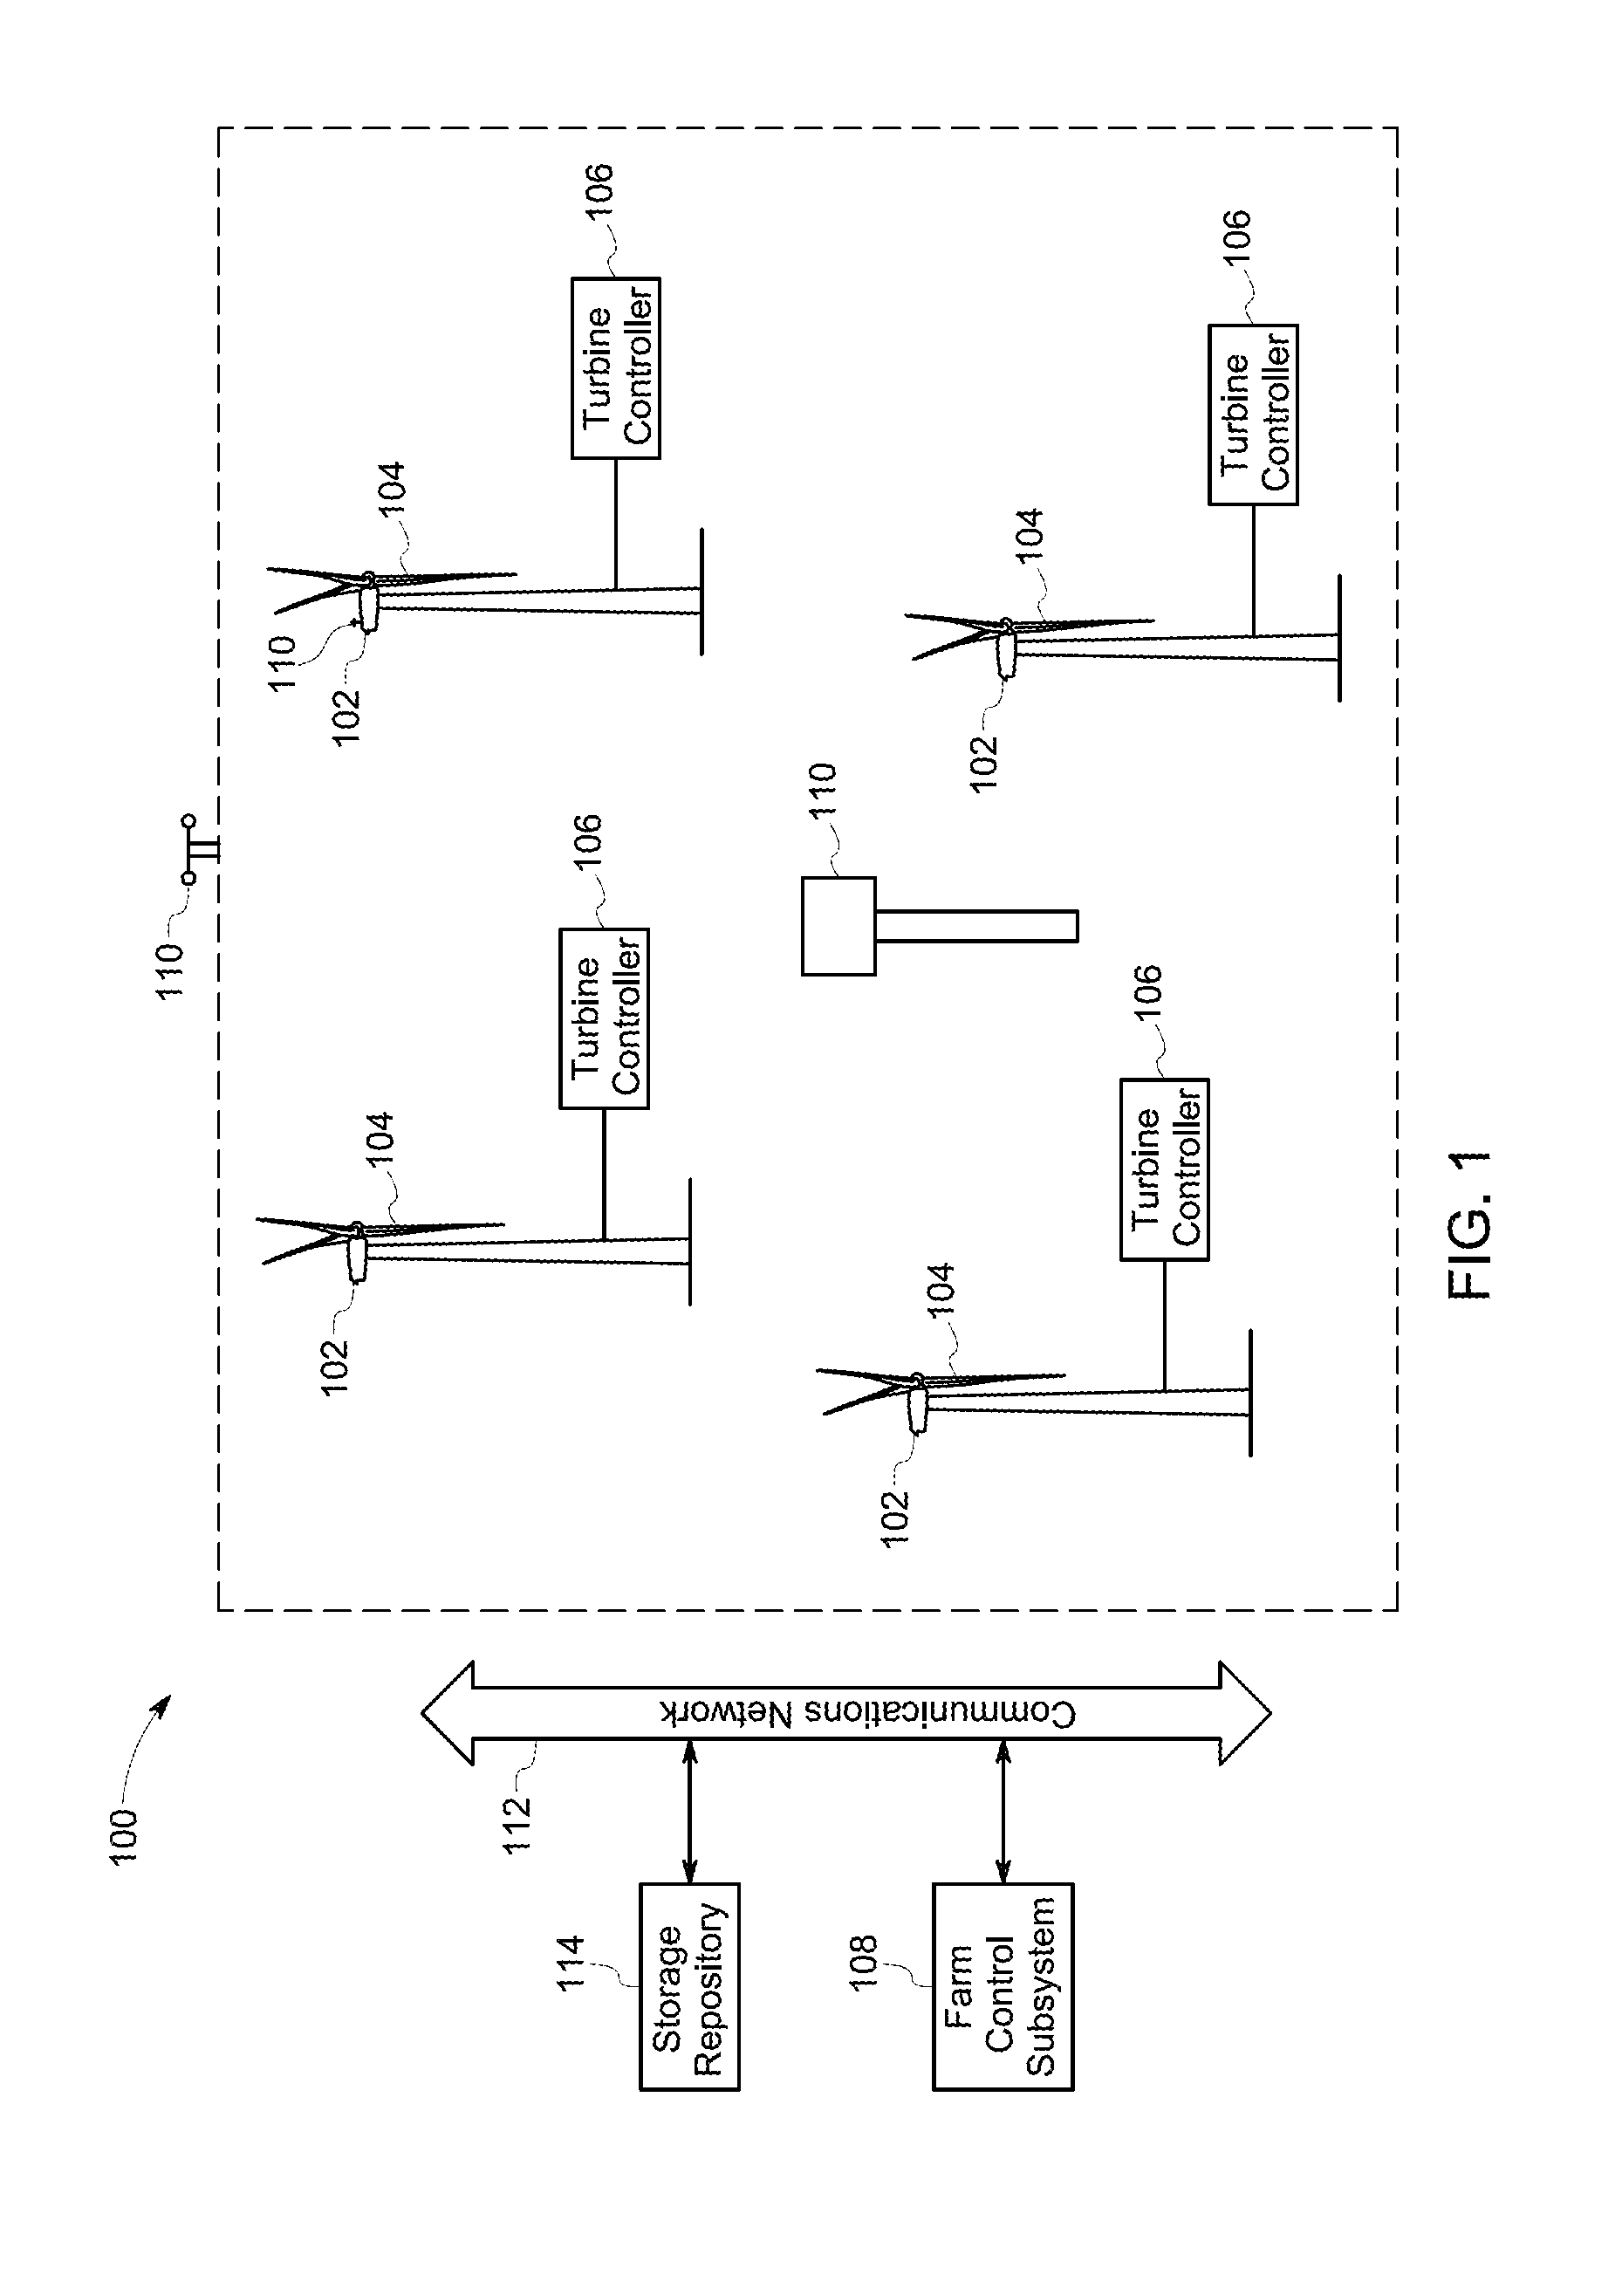 Systems and methods for optimizing operation of a wind farm